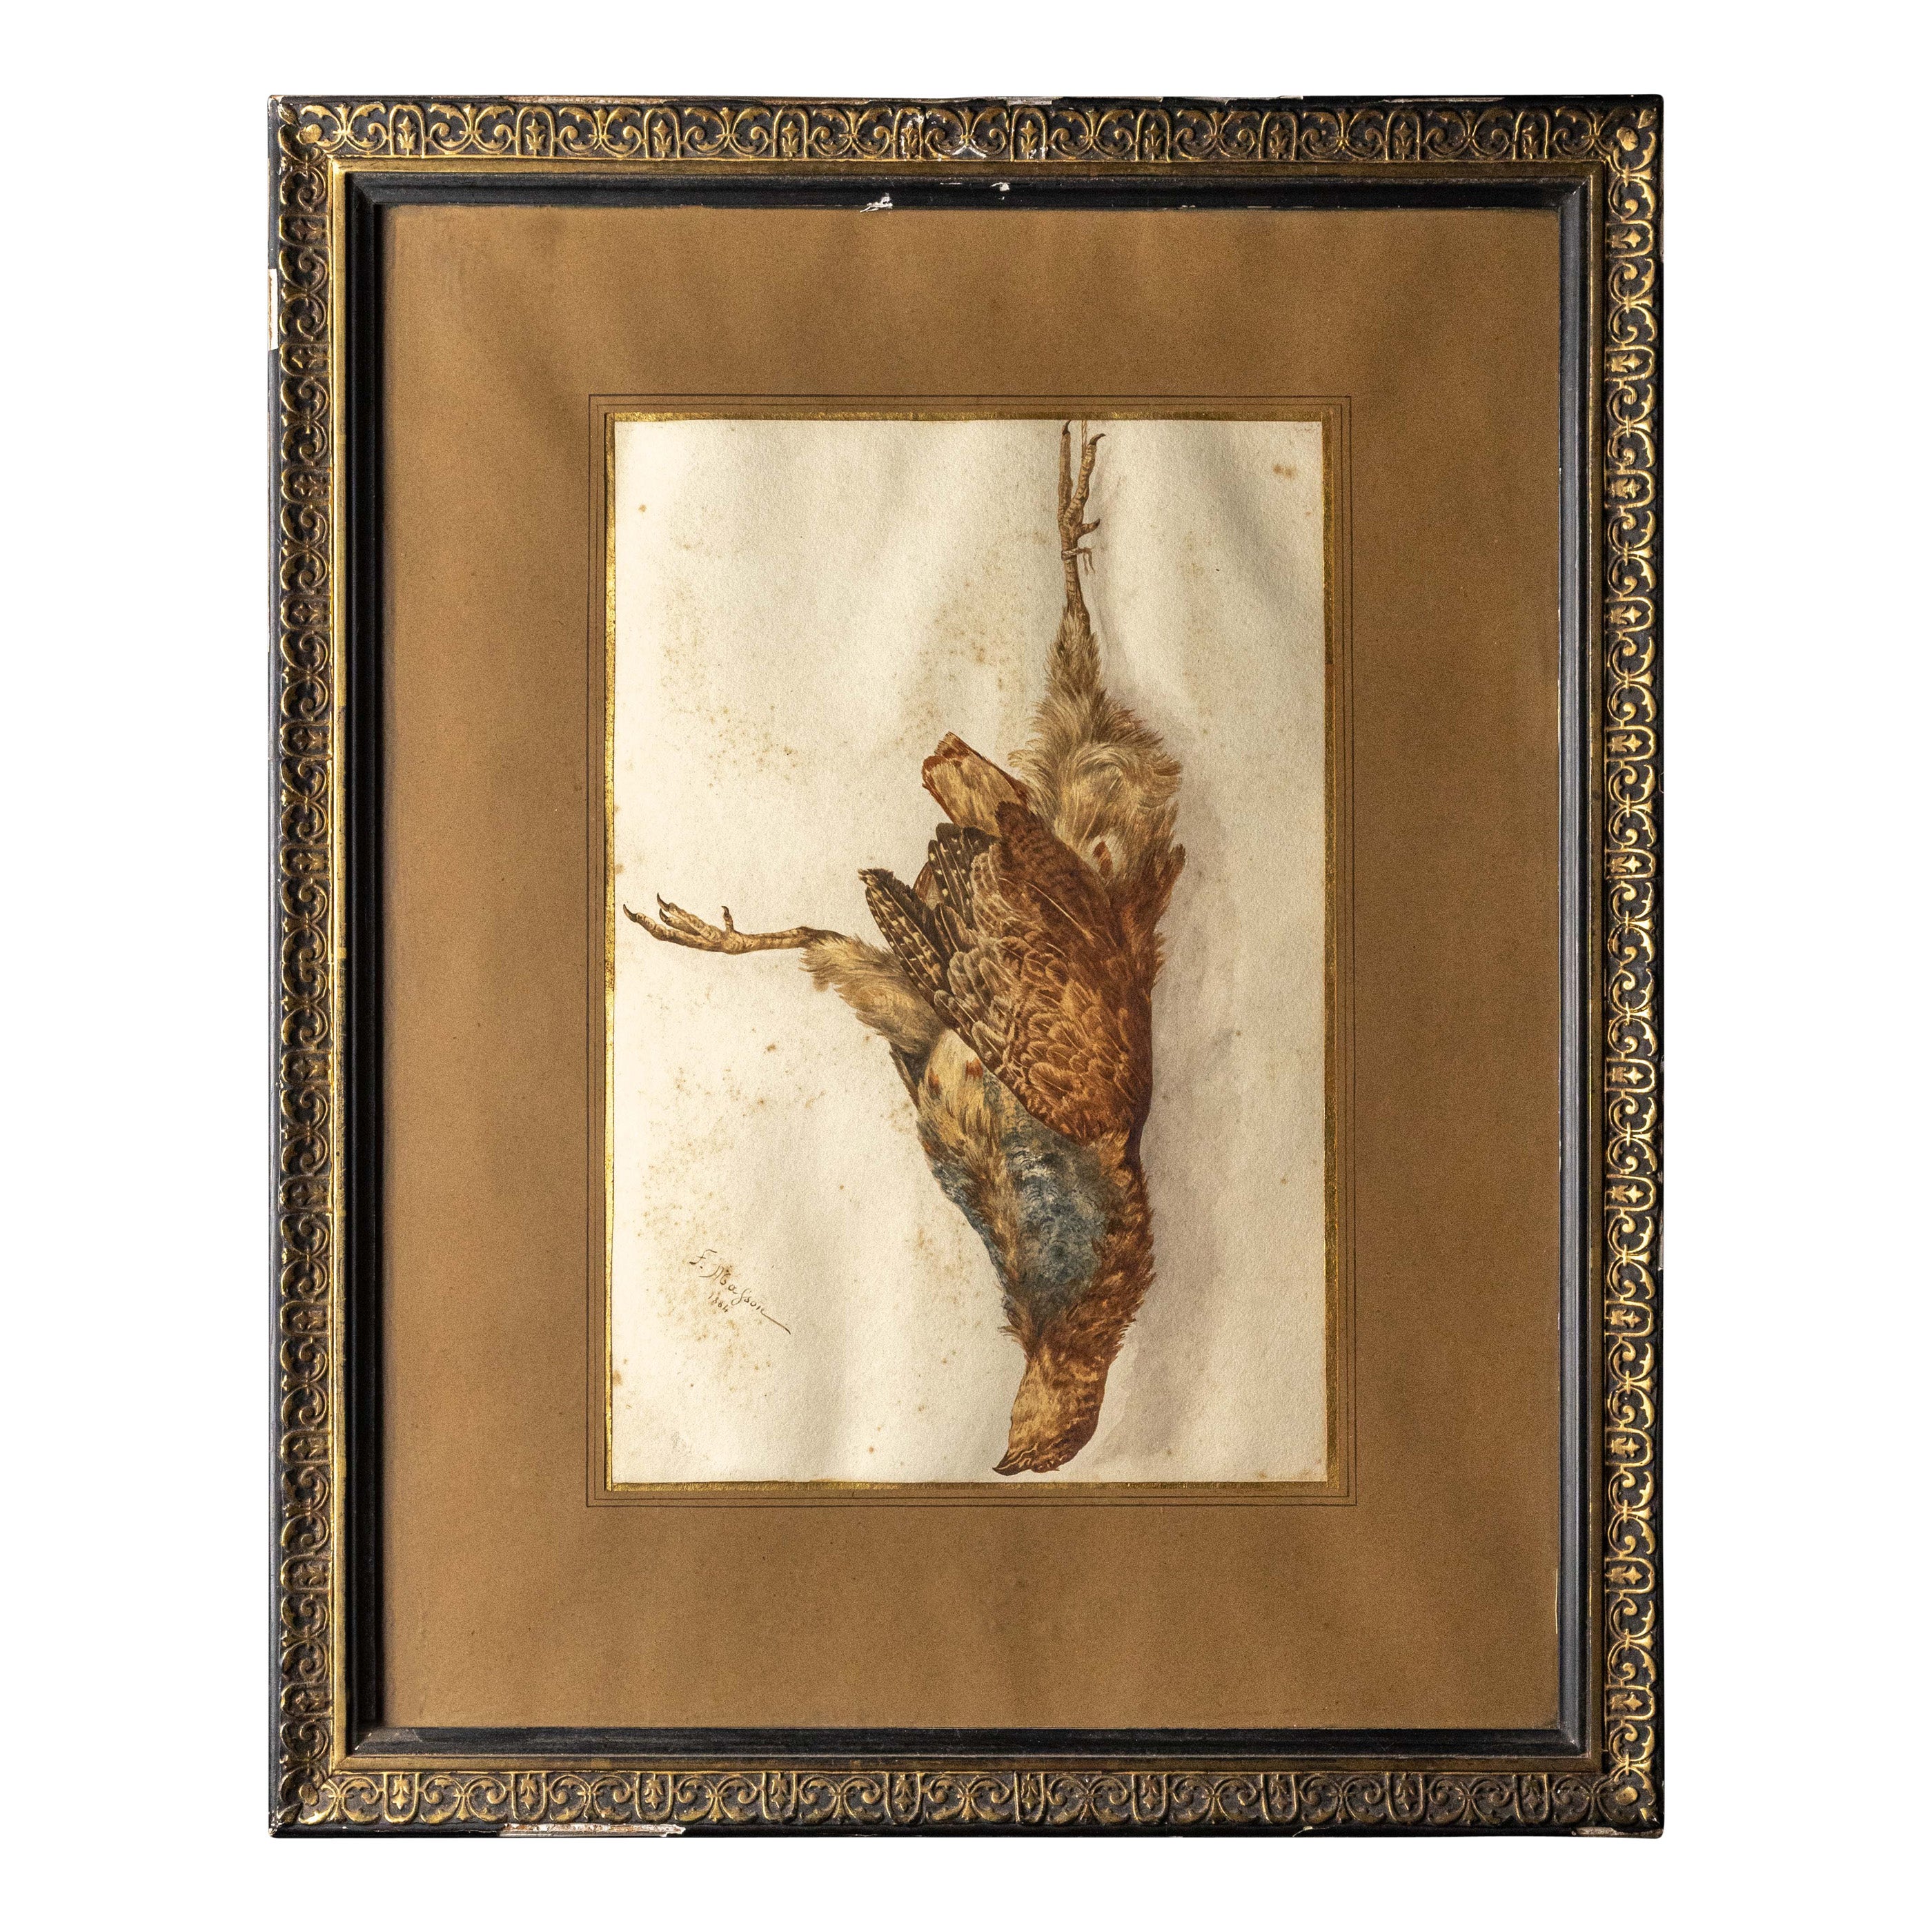 Framed 19th C Gouache of a Bird Signed Frederic Masson